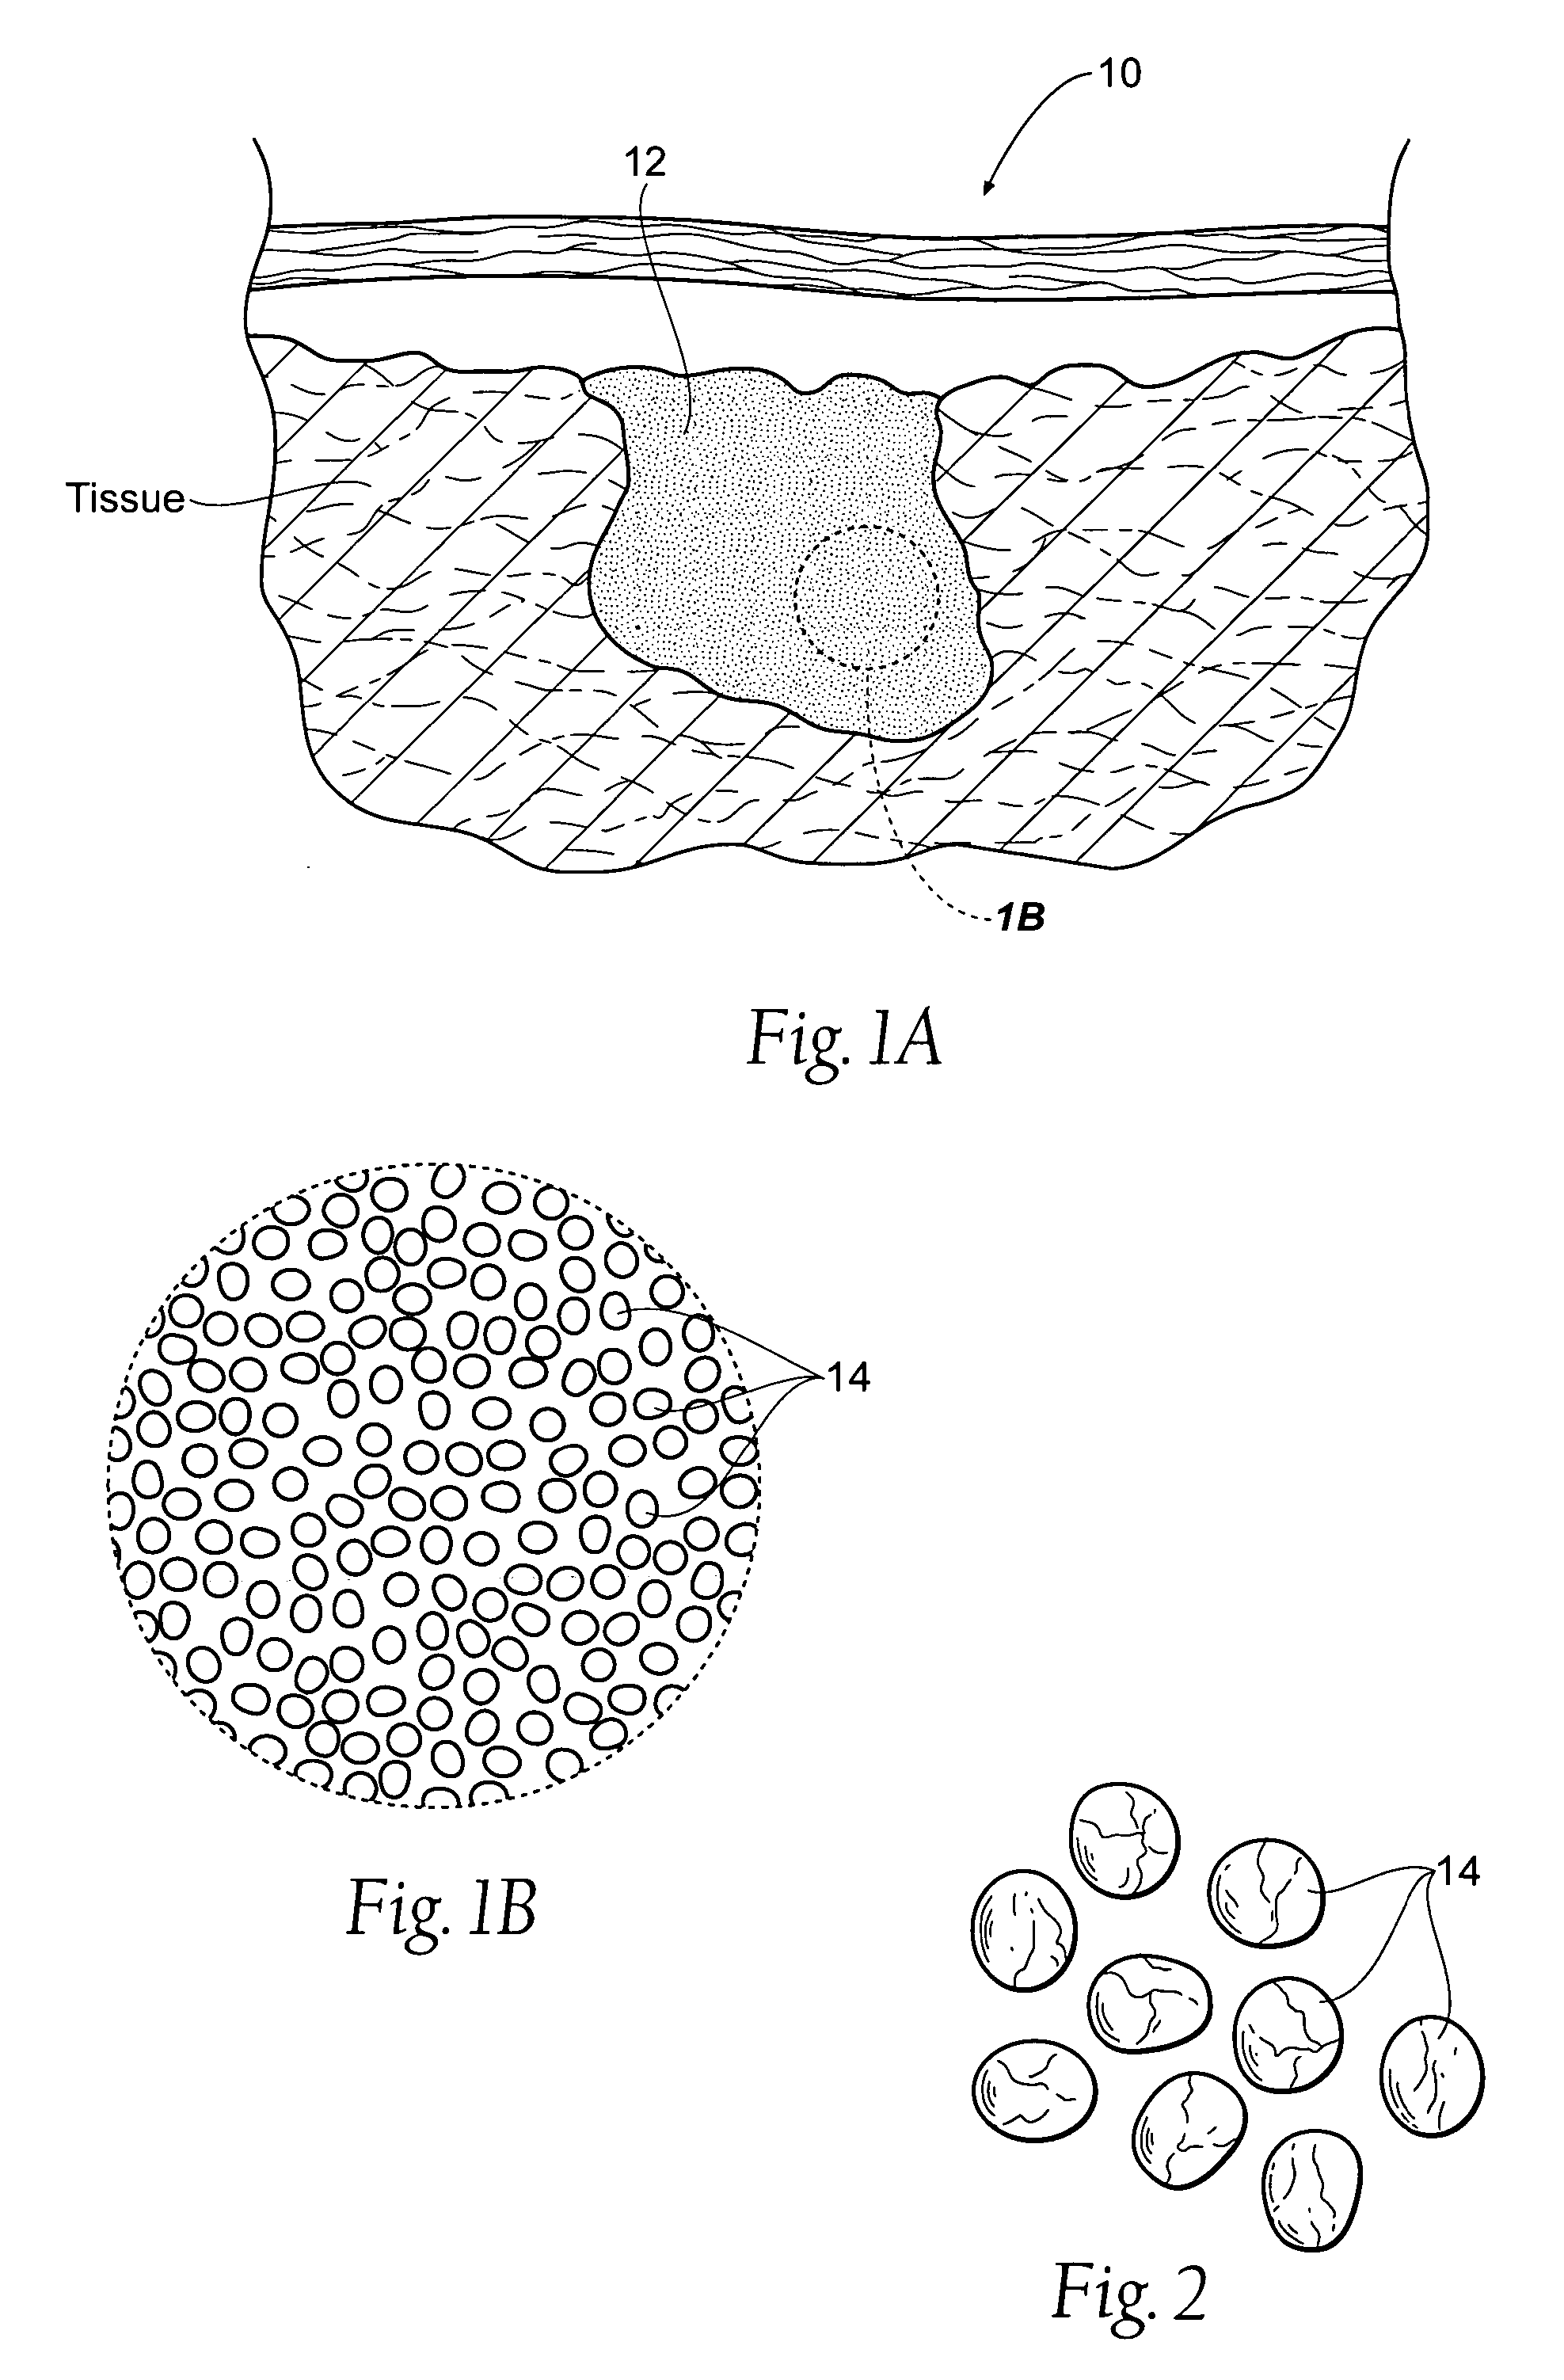 Hemostatic compositions, assemblies, systems, and methods employing particulate hemostatic agents formed from hydrophilic polymer foam such as chitosan